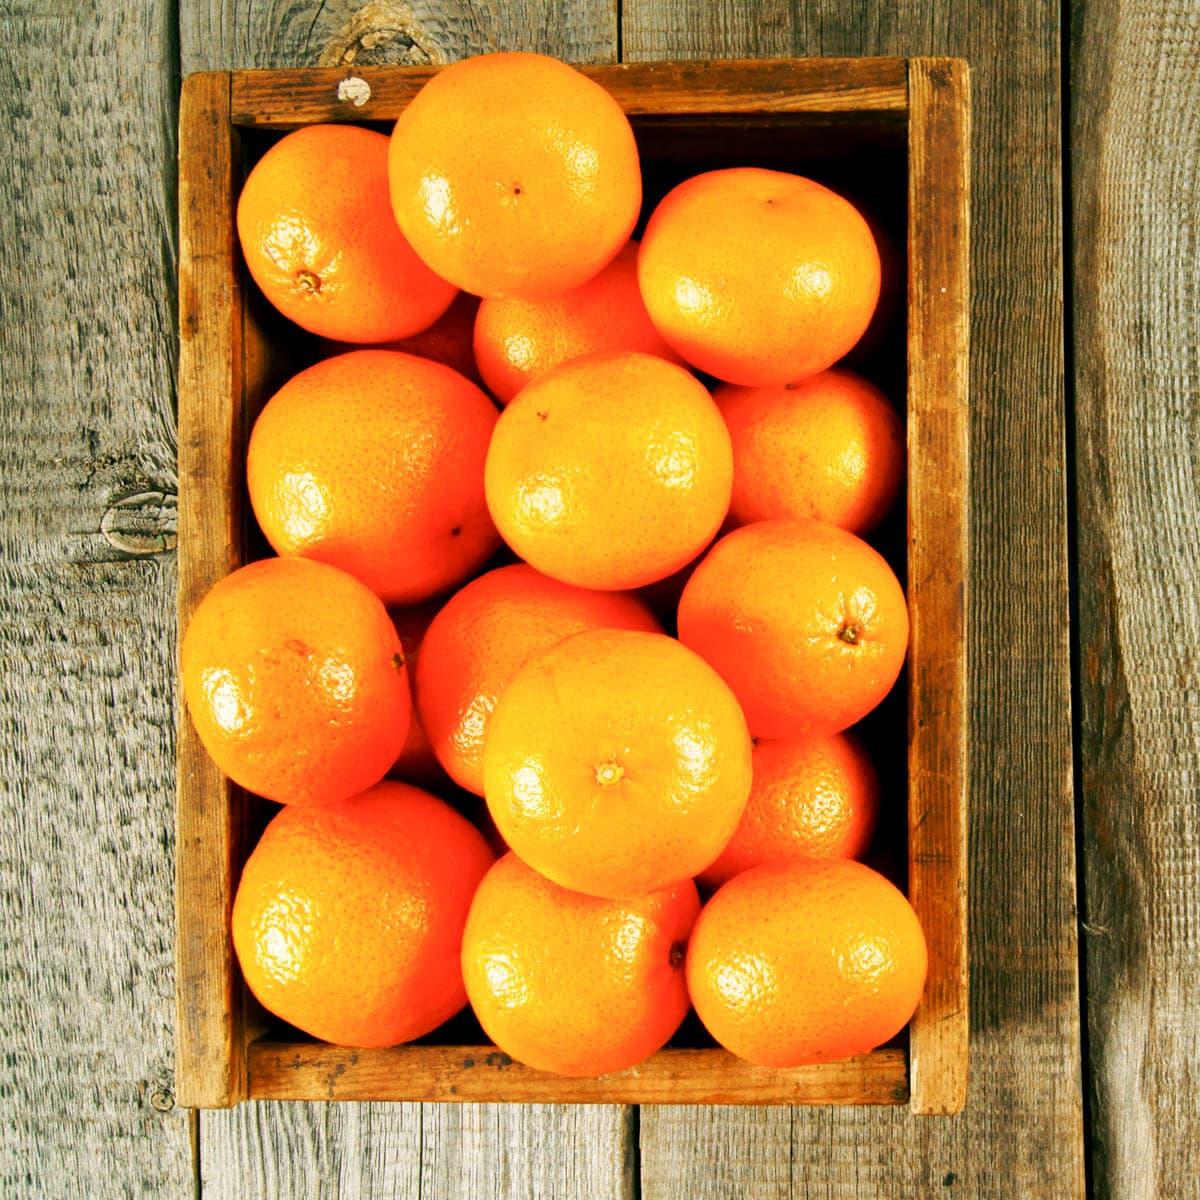 Top view of a wooden box filled with ripe tangerines on a wooden table.